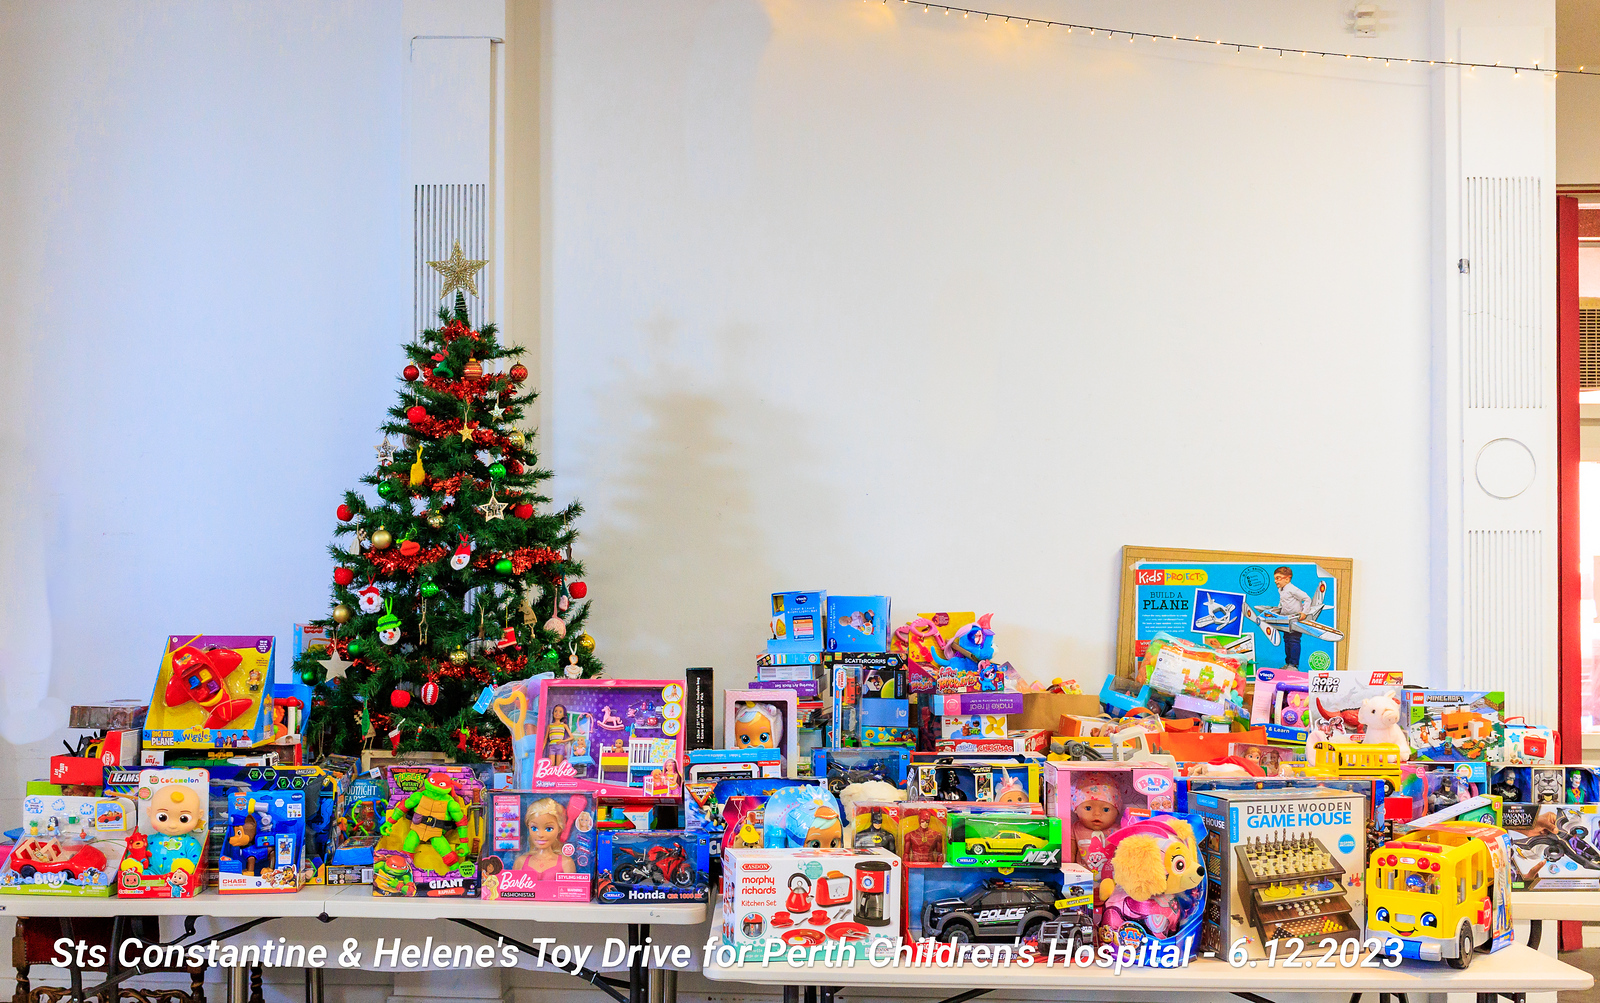 Perth: 515 toys donated to Perth Children’s Hospital